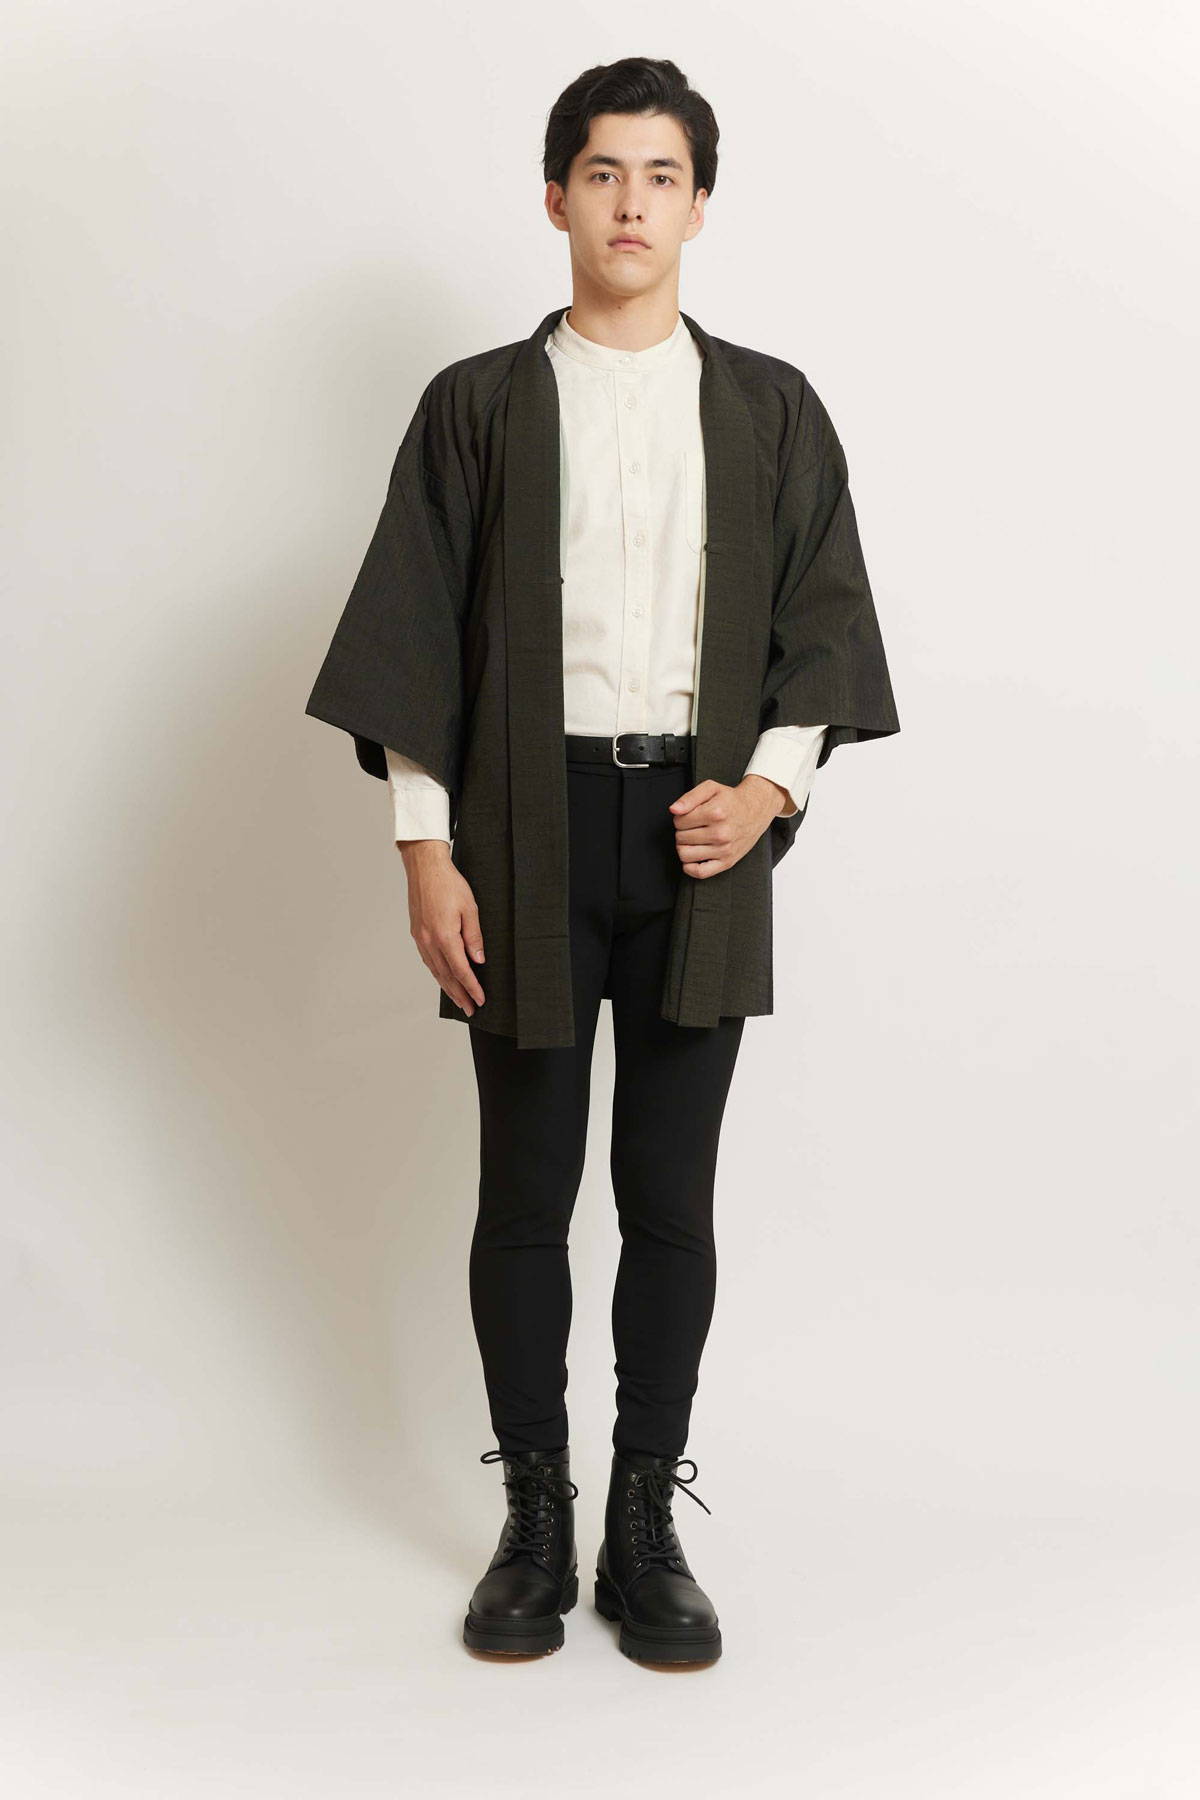 33 Traditional Japanese Clothing You'll Want to Wear – Japan Objects Store